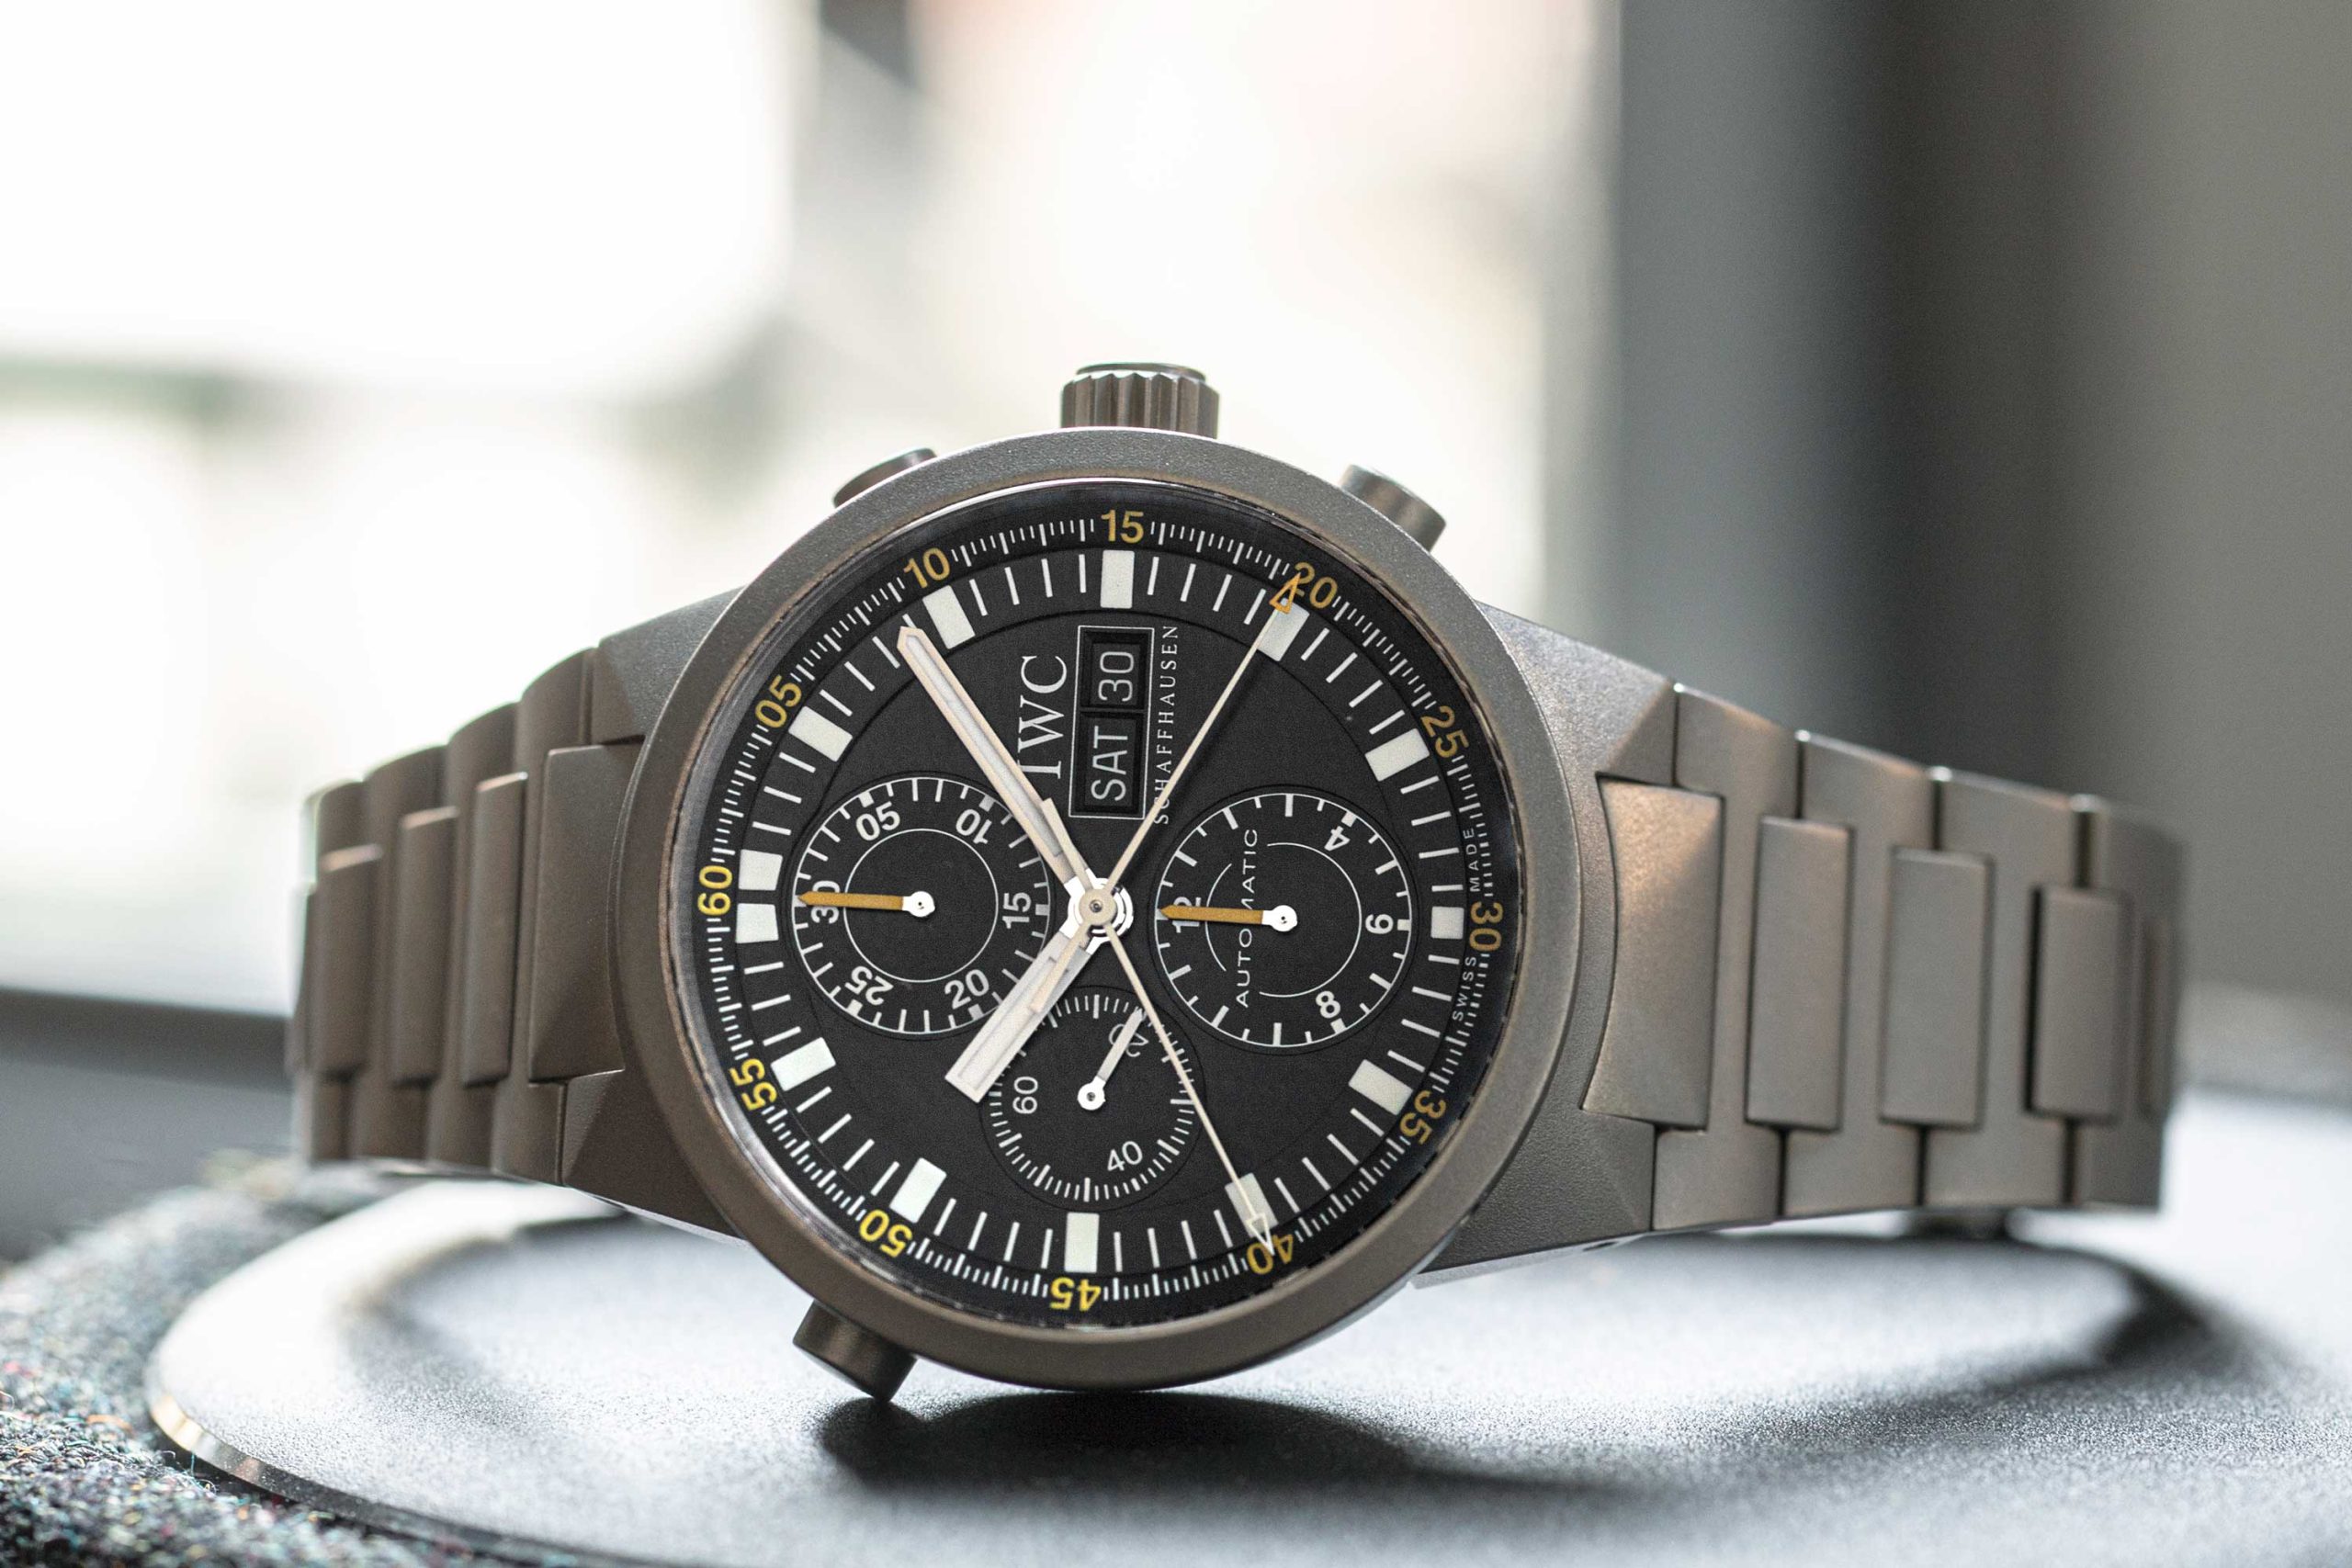 Available in the shop: The IWC GST Chrono Rattrapante